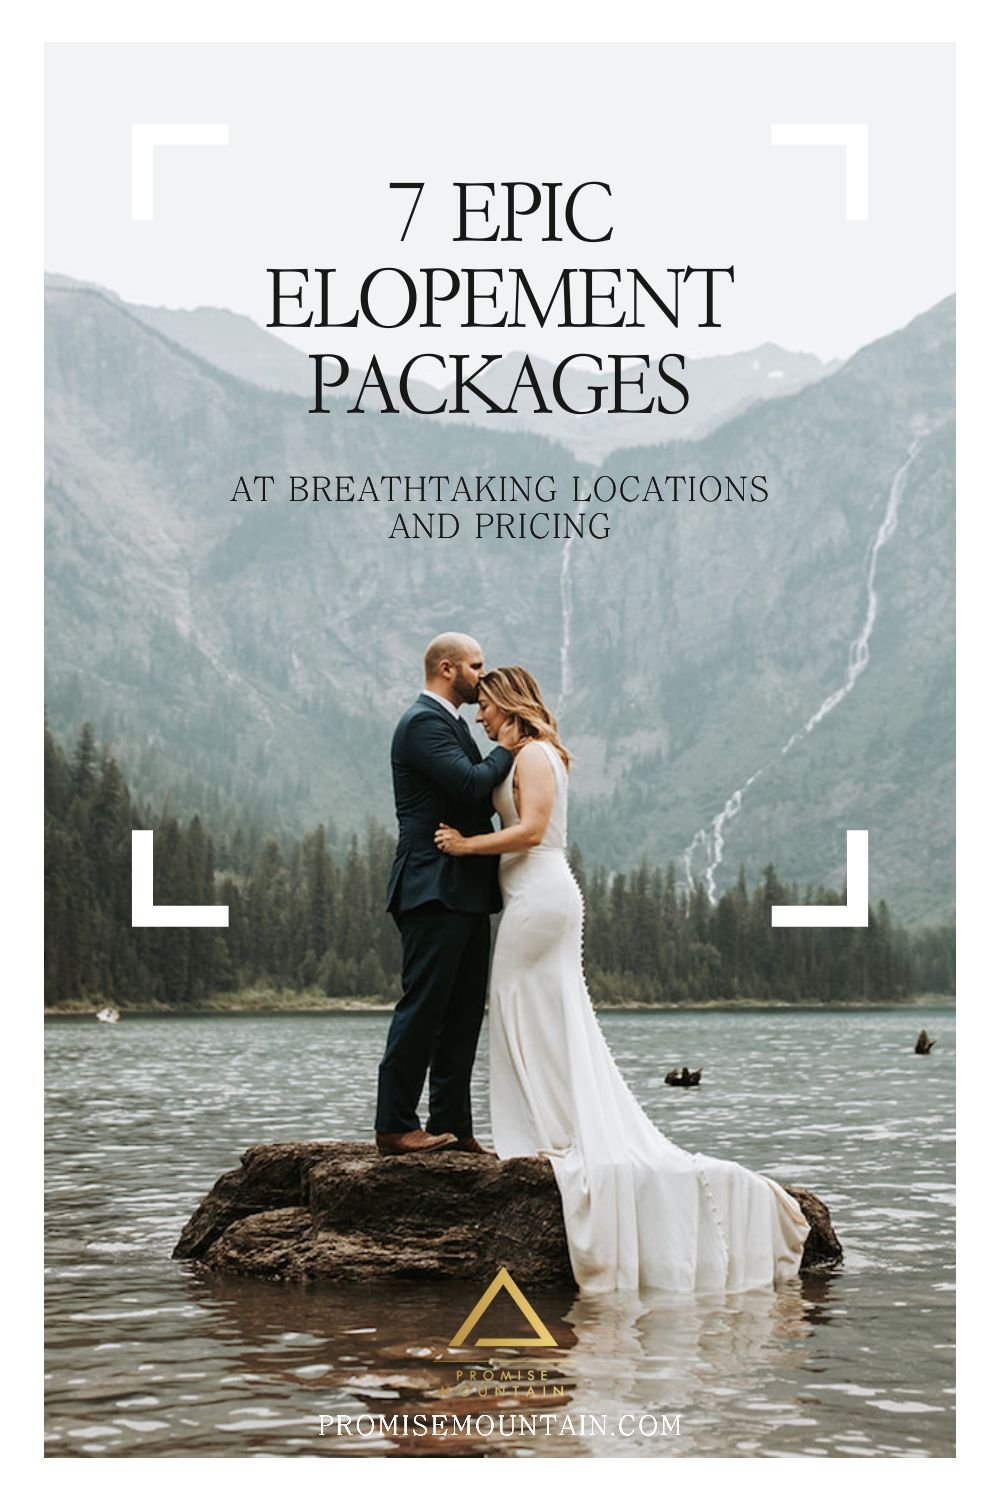 Groom planting a kiss on the bride's forehead as they stand on a rock in the middle of the lake; image overlaid with text that reads 7 Epic Elopement Packages at Breathtaking Locations and Pricing